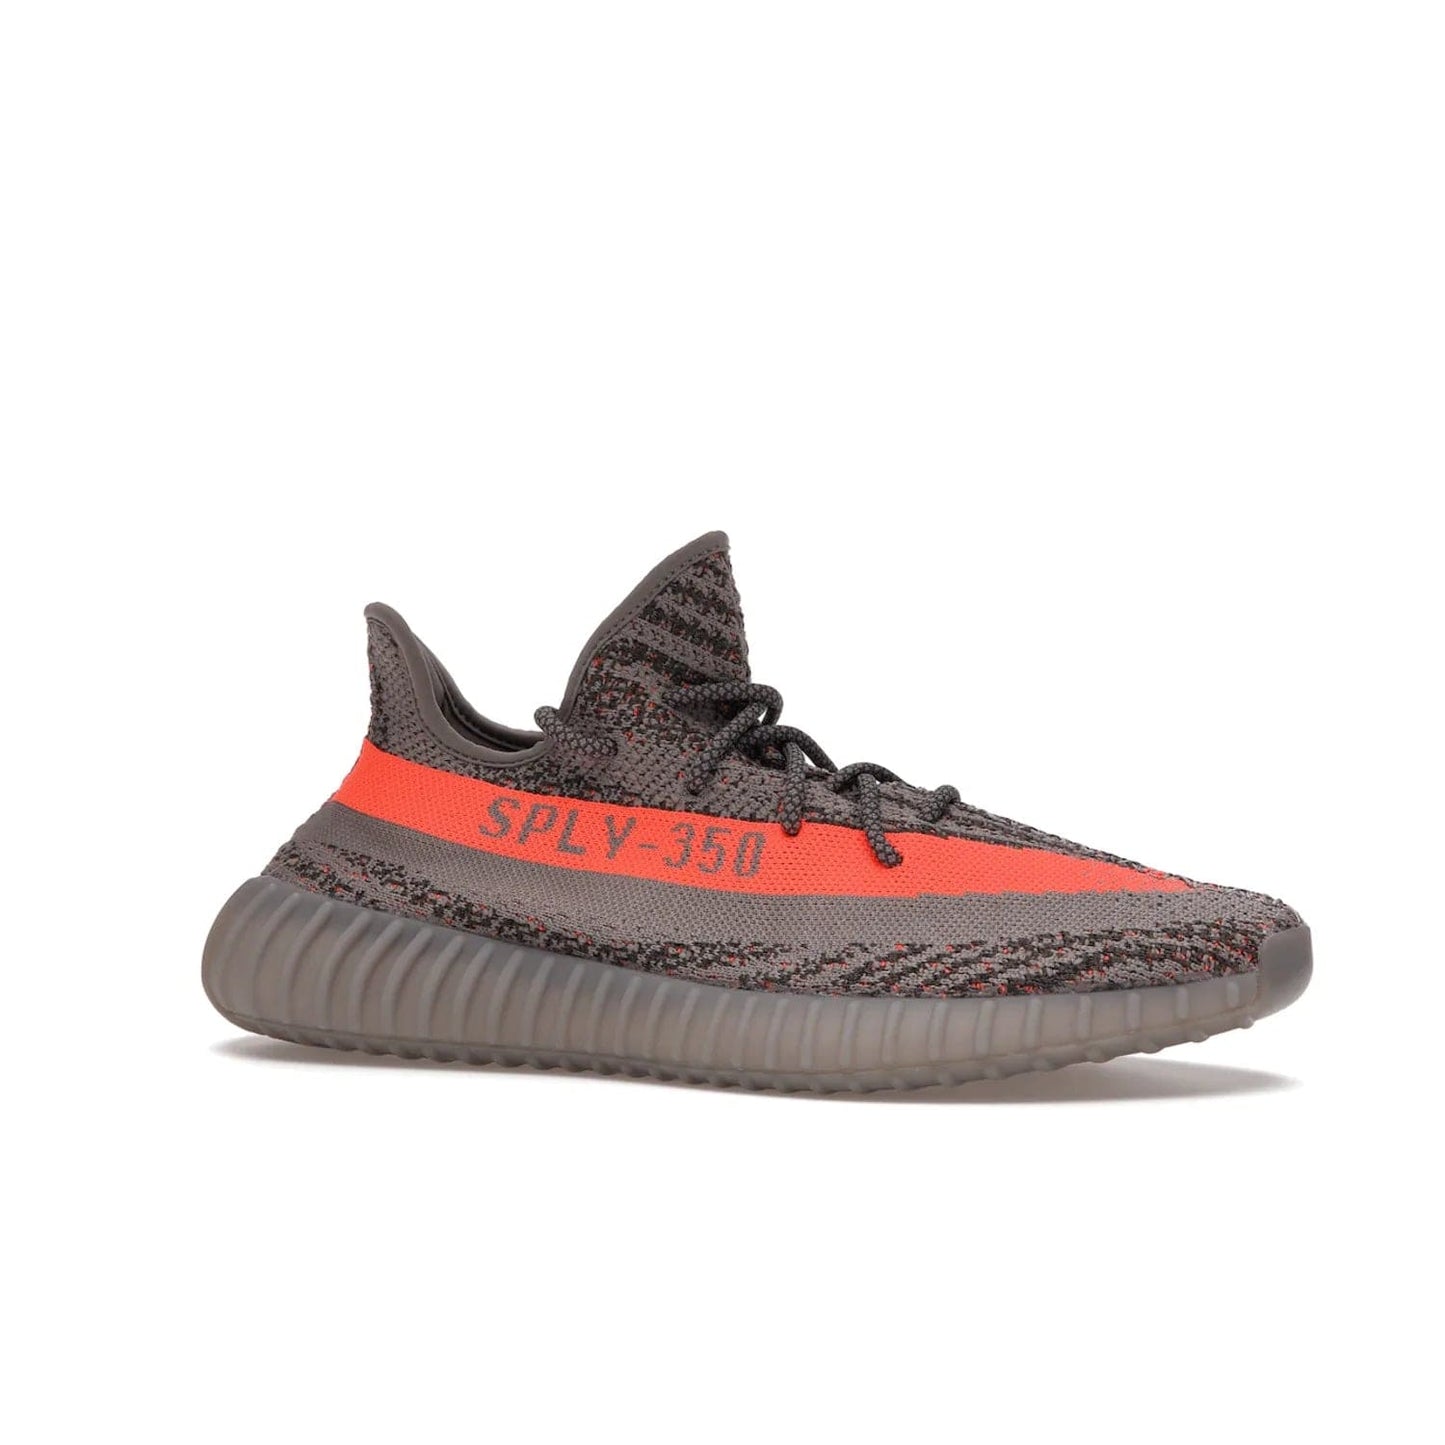 adidas Yeezy Boost 350 V2 Beluga Reflective - Image 3 - Only at www.BallersClubKickz.com - Shop the adidas Yeezy Boost 350 V2 Beluga Reflective: a stylish, reflective sneaker that stands out. Featuring Boost sole, Primeknit upper & signature orange stripe. Available Dec 2021.